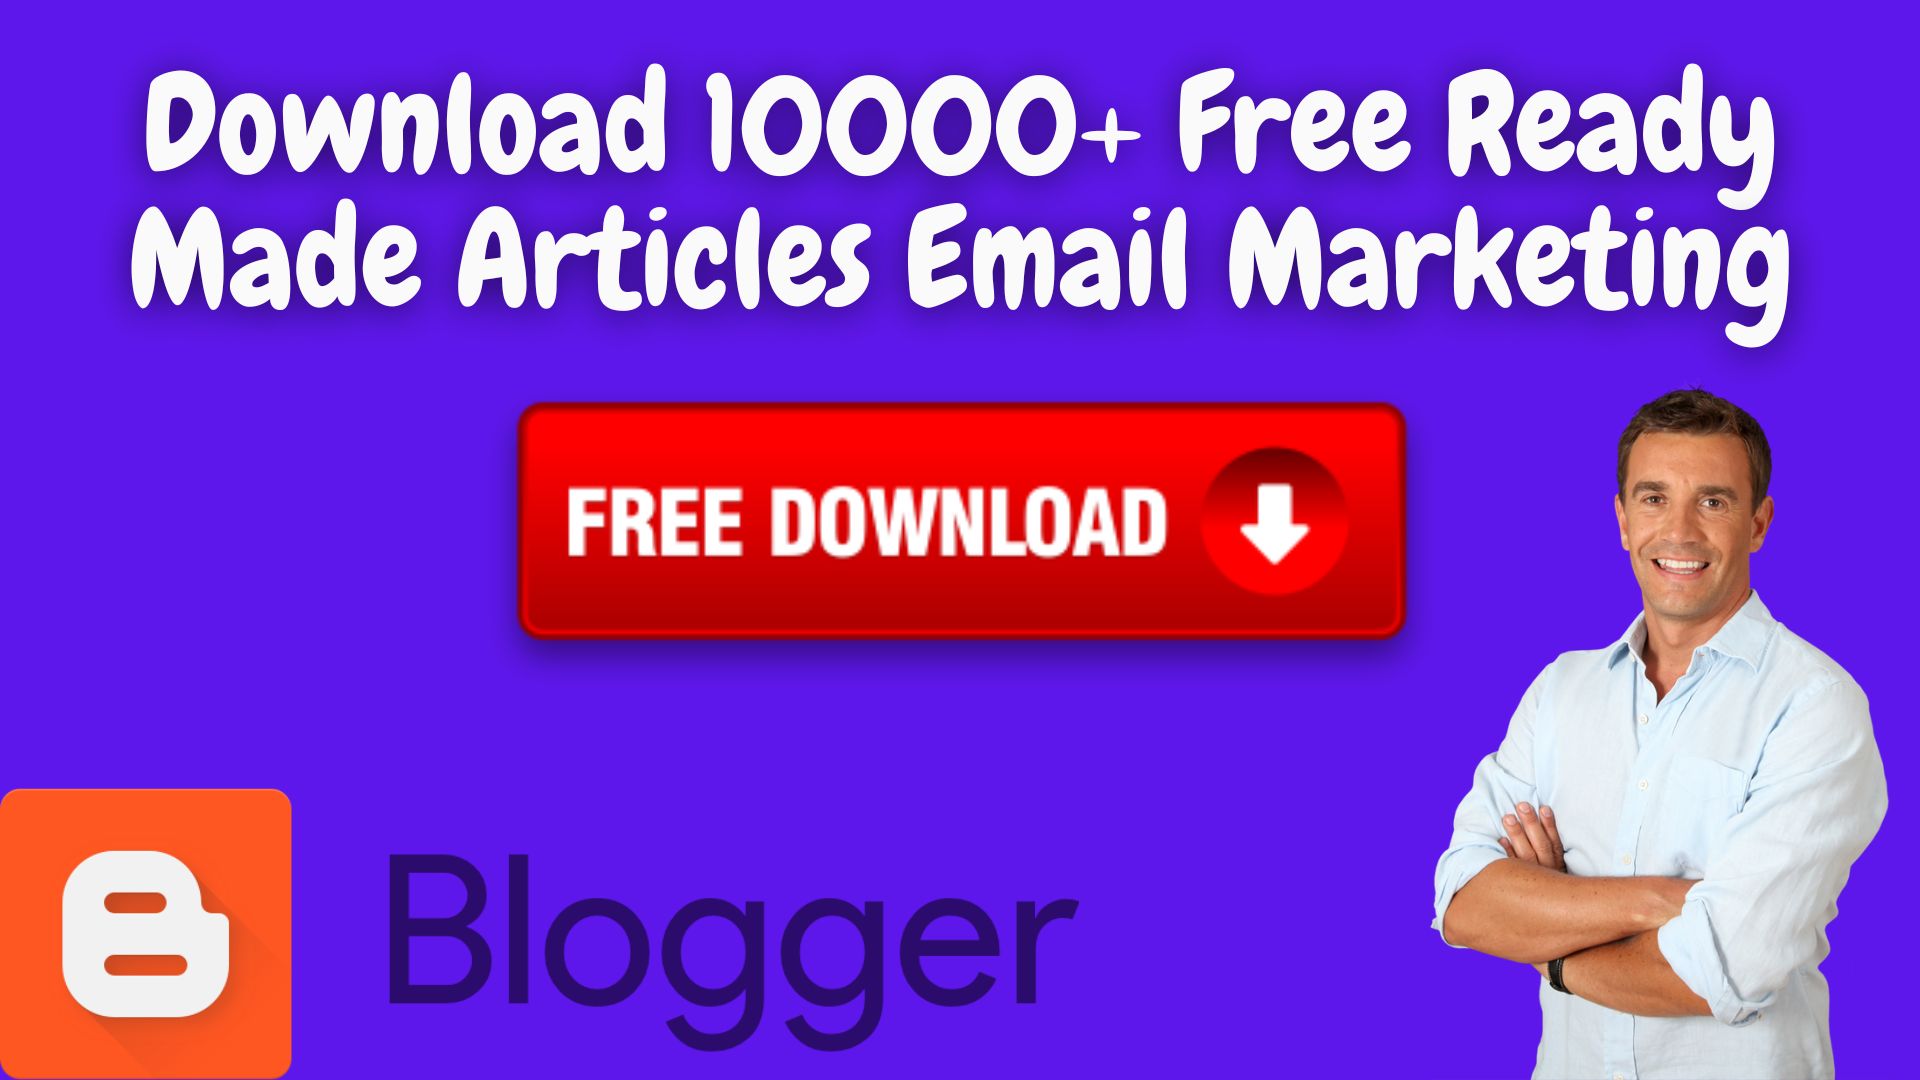 Download 10000+ Free Ready Made Articles Email Marketing